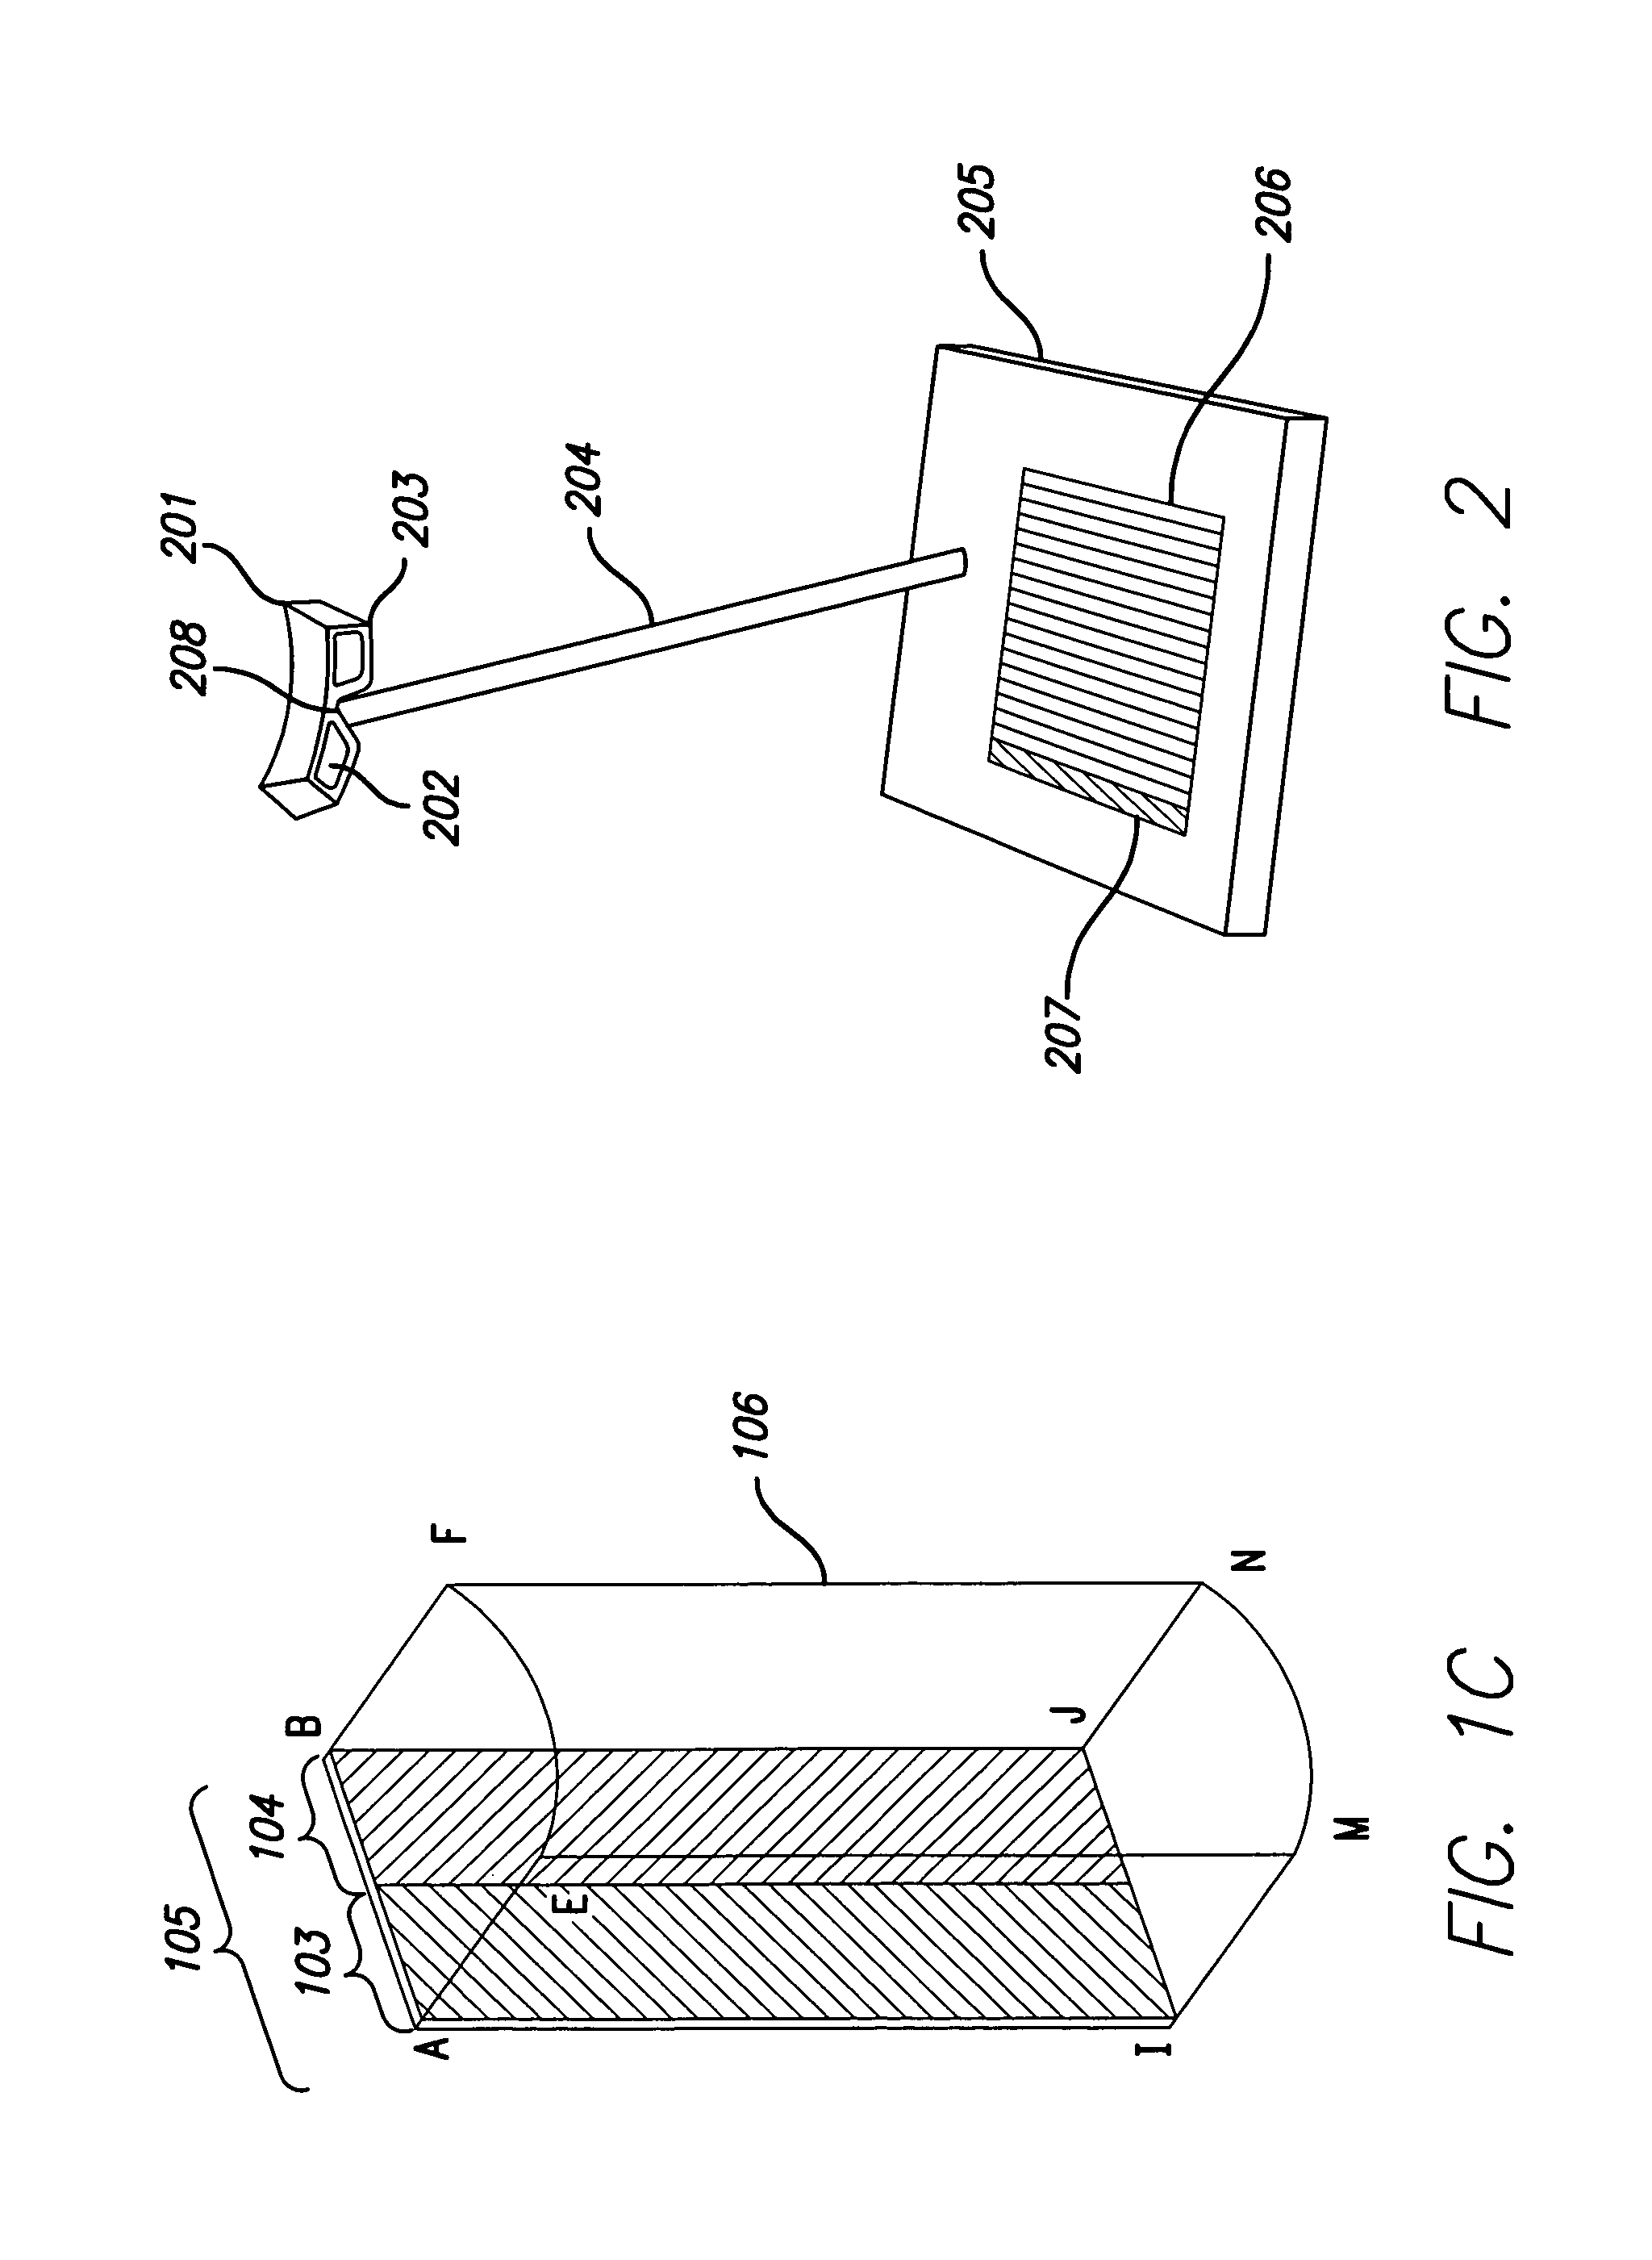 Method and apparatus for optimizing the viewing distance of a lenticular stereogram